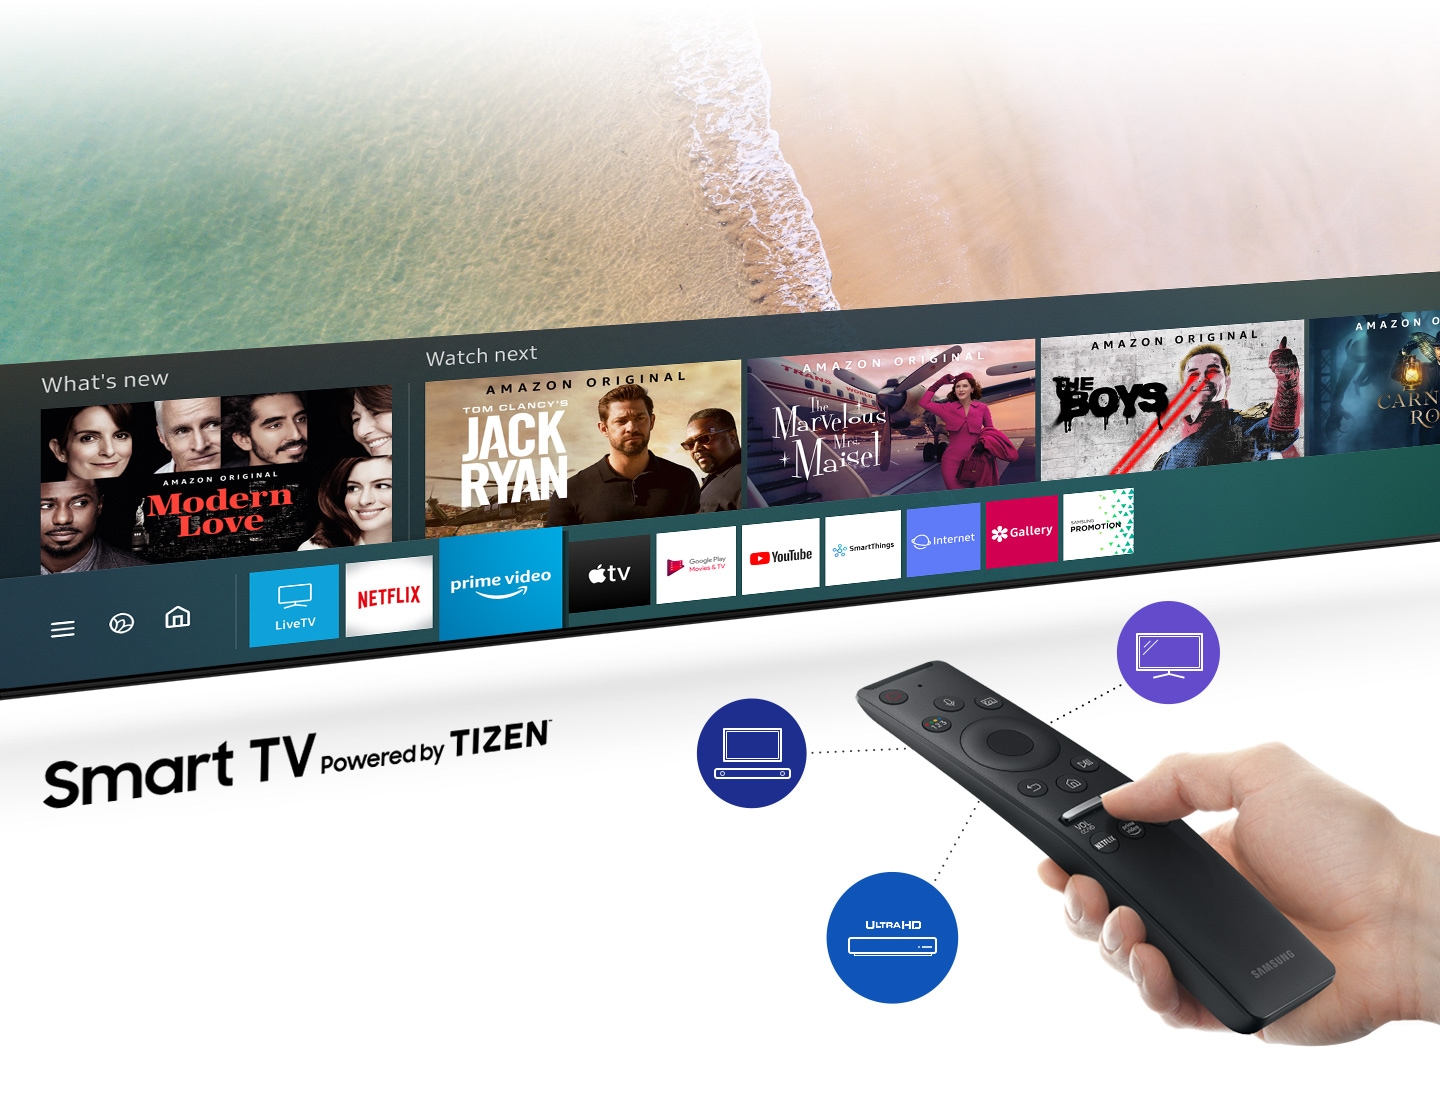 Access a variety of content with one remote